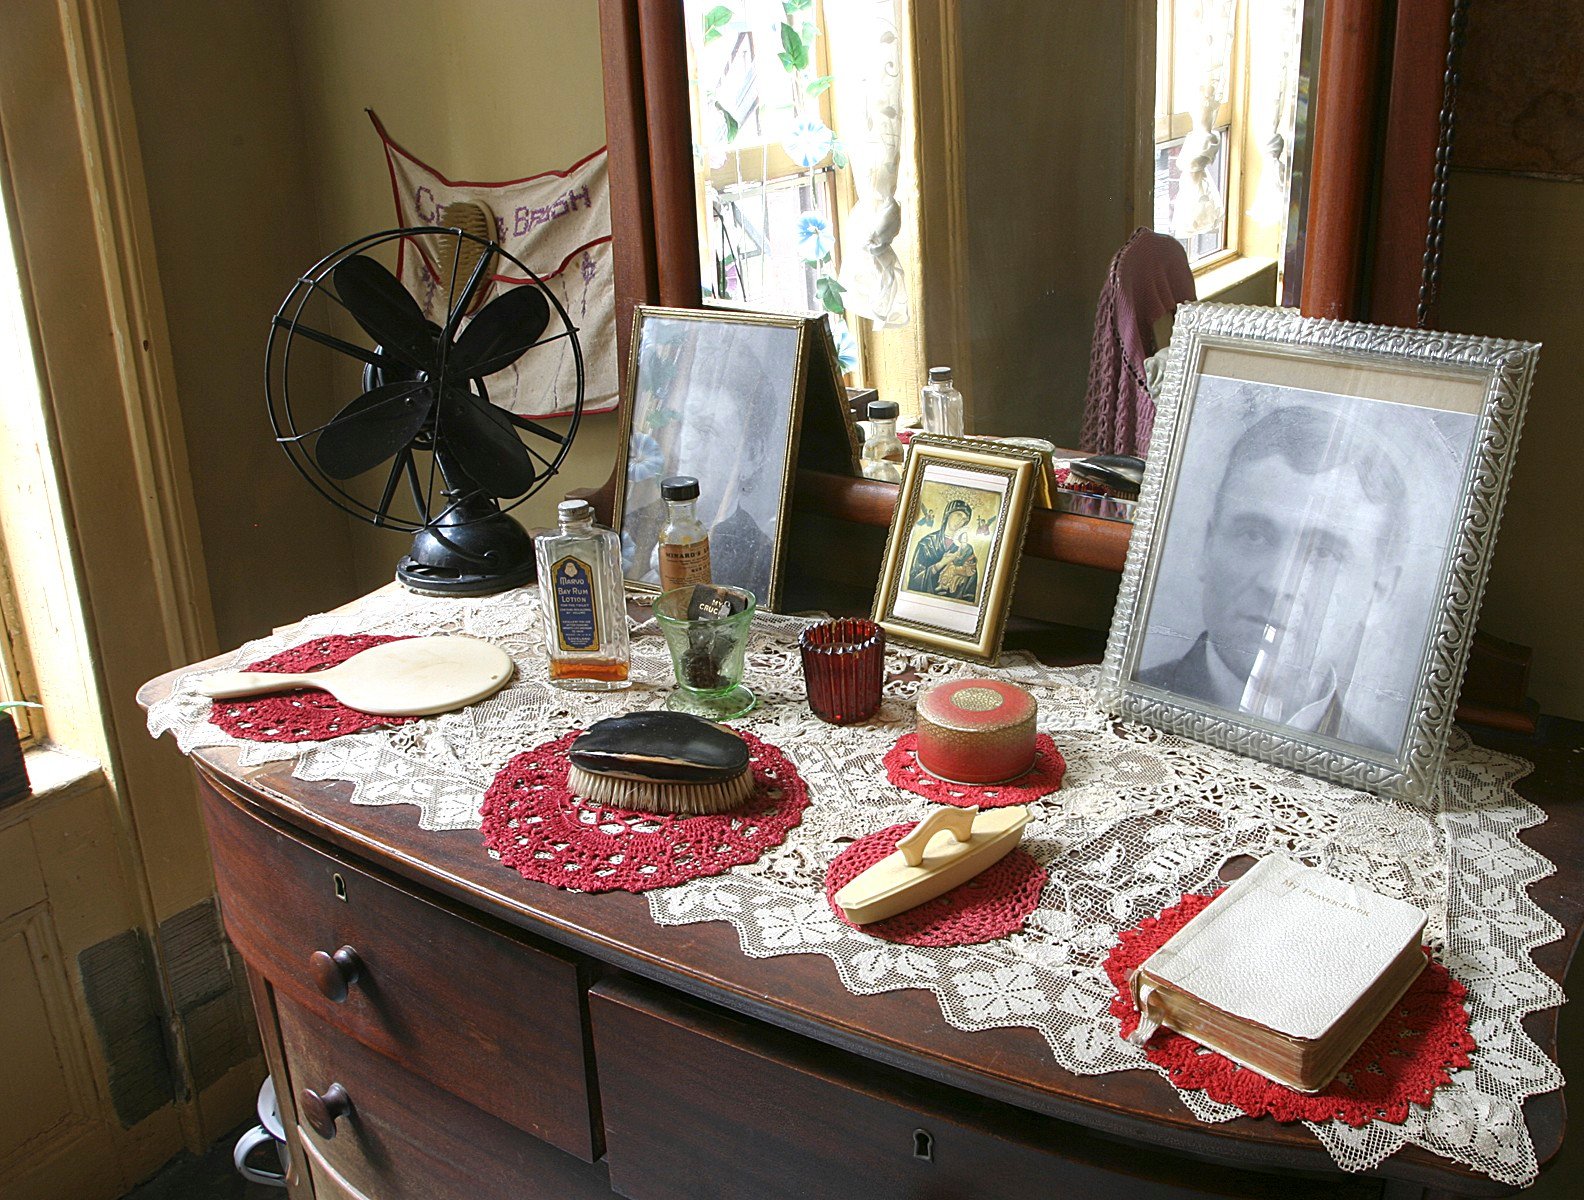 Brown vanity dresser with doilies, a fan, products, hair brushes, and photos of two family members inside the recreated Baldizzi apartment